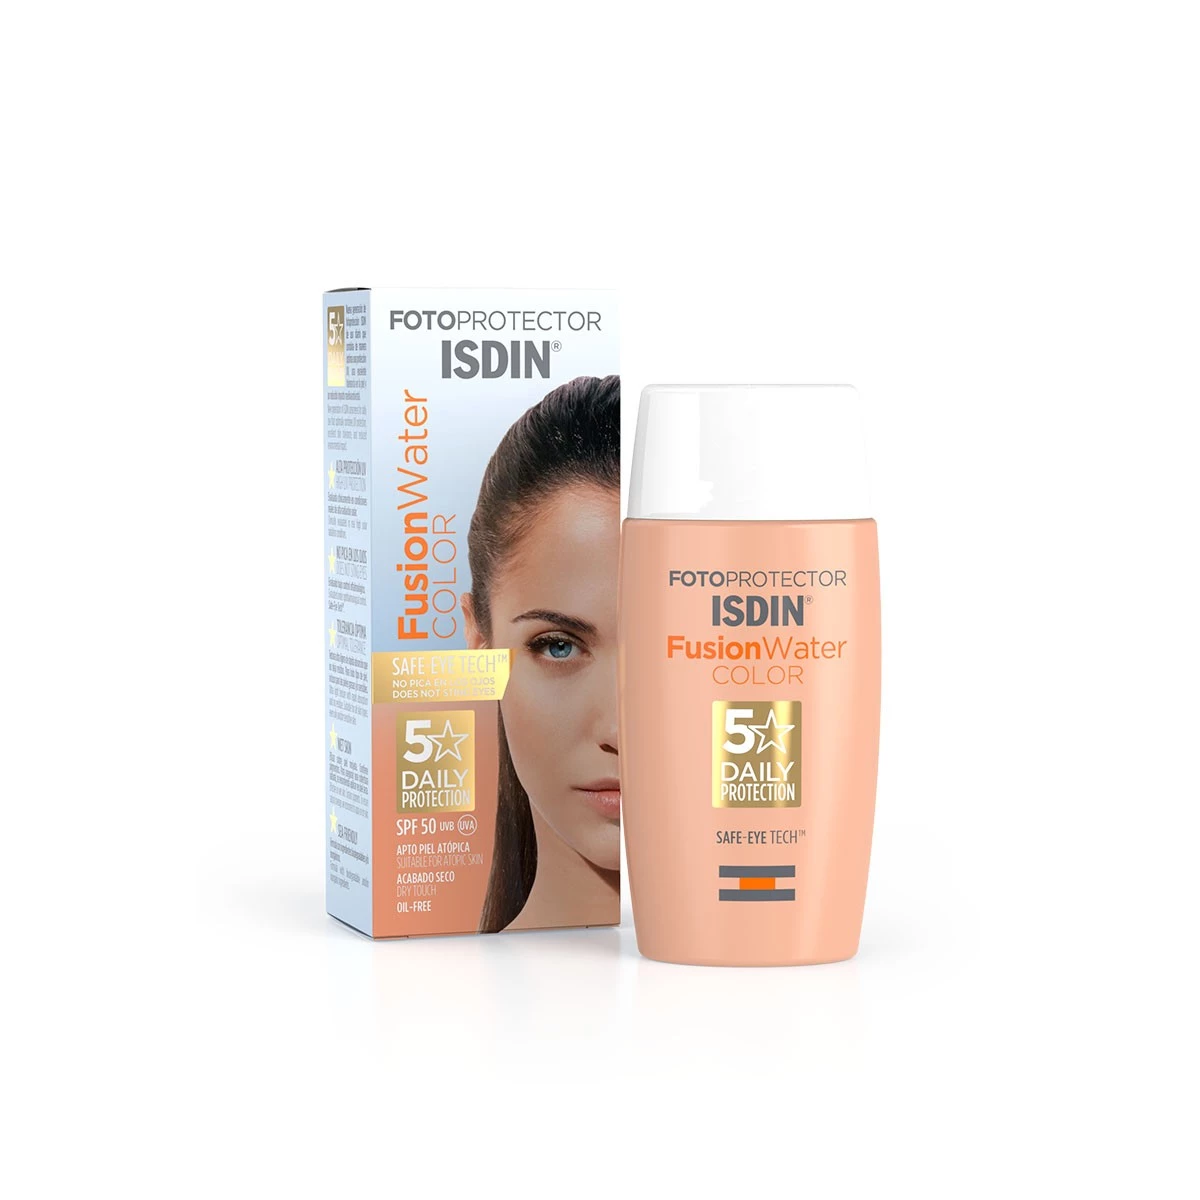 Isdin Fusion Water Color SPF50+, 50ml.